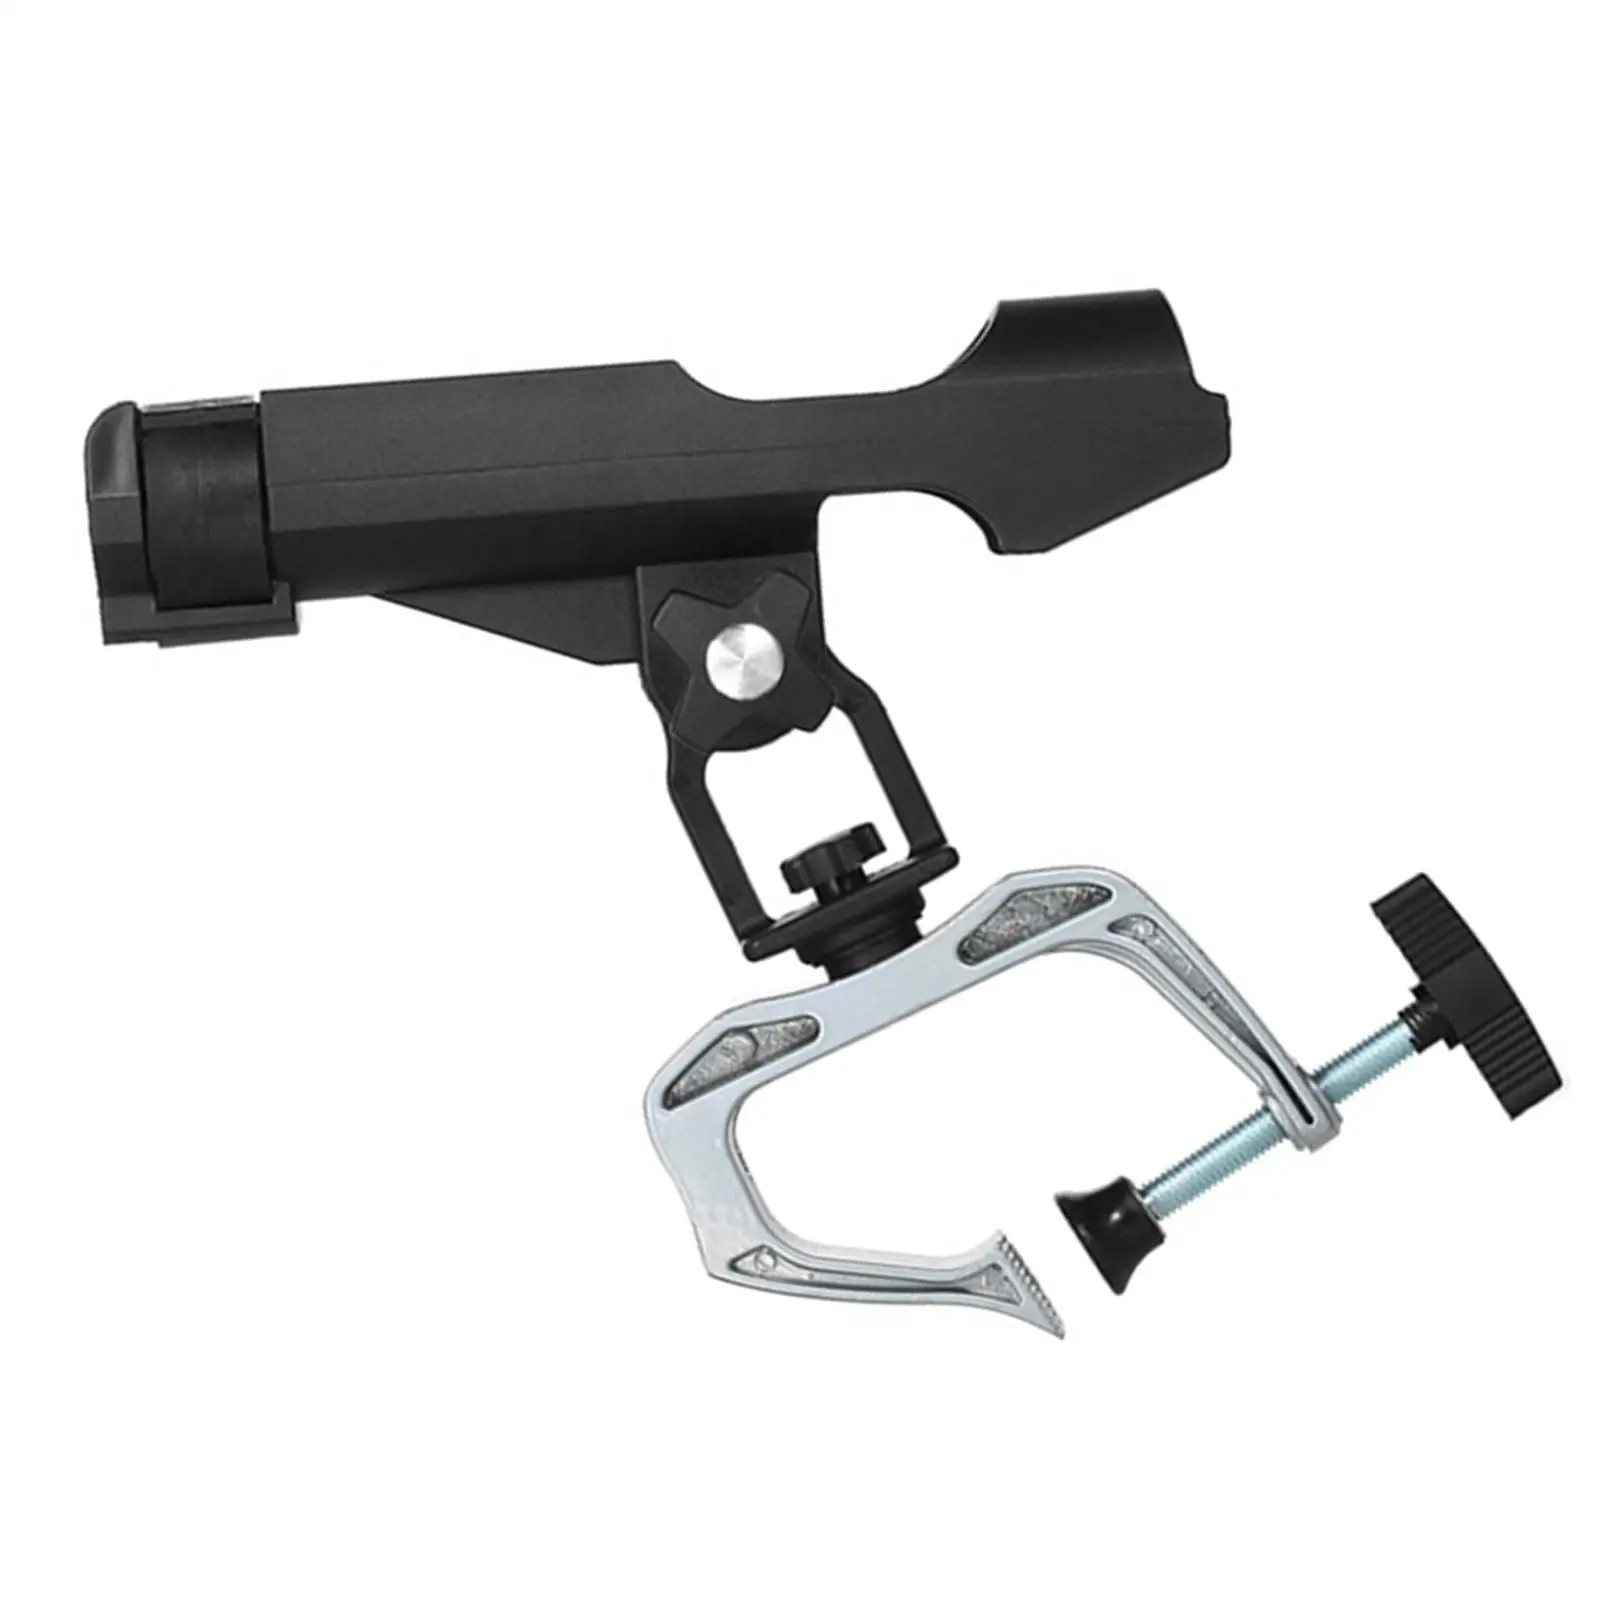 Fishing Rod Holder with Clamp Stand Rack 360 Degree Adjustable Deck Mount Swivel